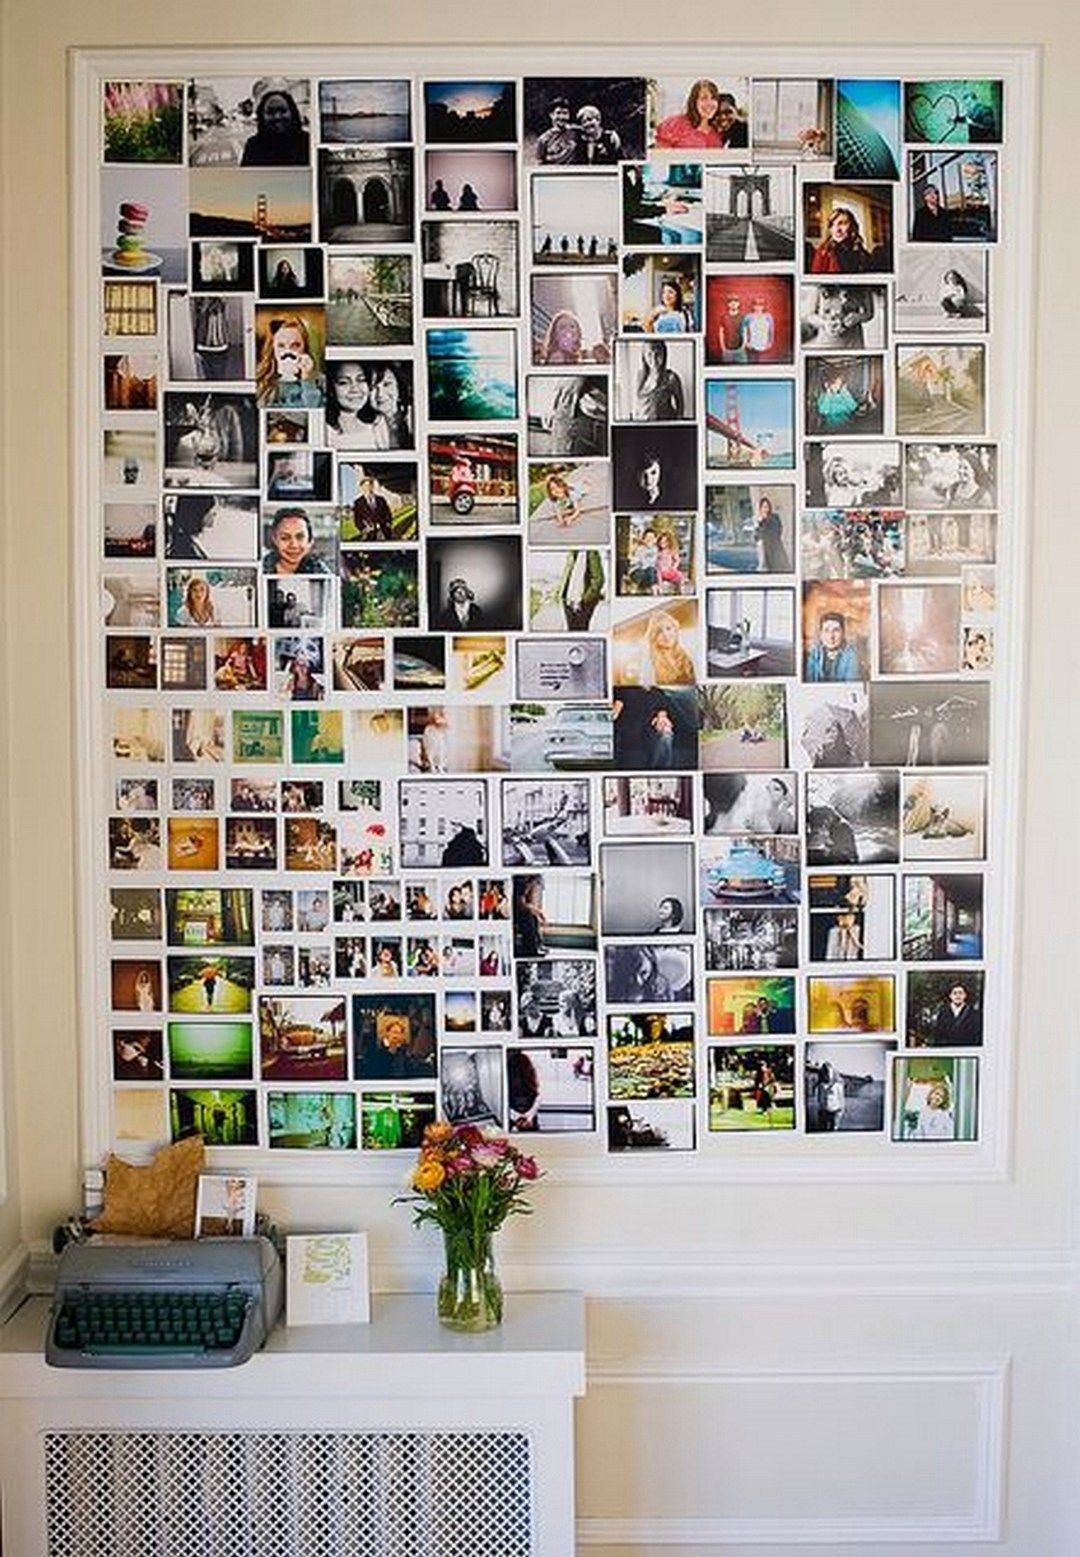 https://foter.com/photos/270/large-picture-frame-collages-for-wall.jpg